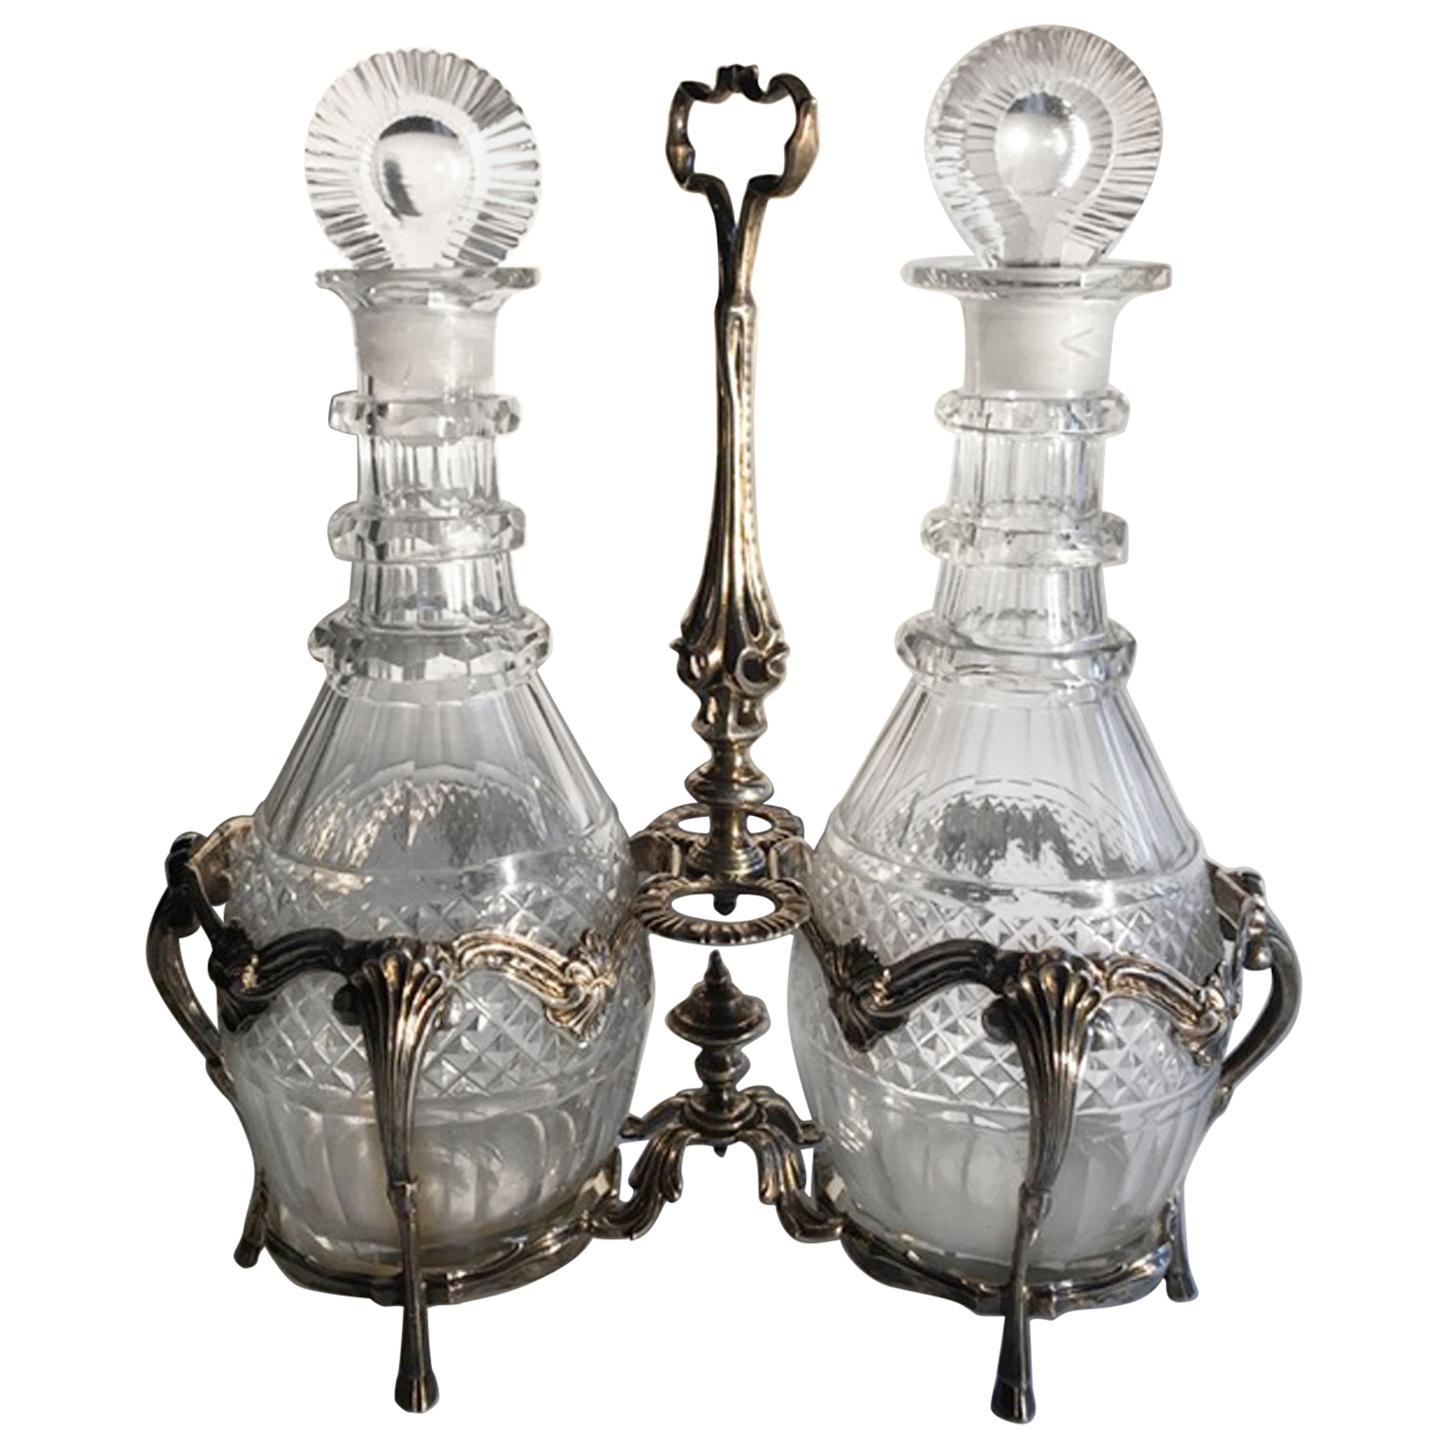 London 1750 George IV Silver Cruet Service Set with Two Cut Glass Bottles